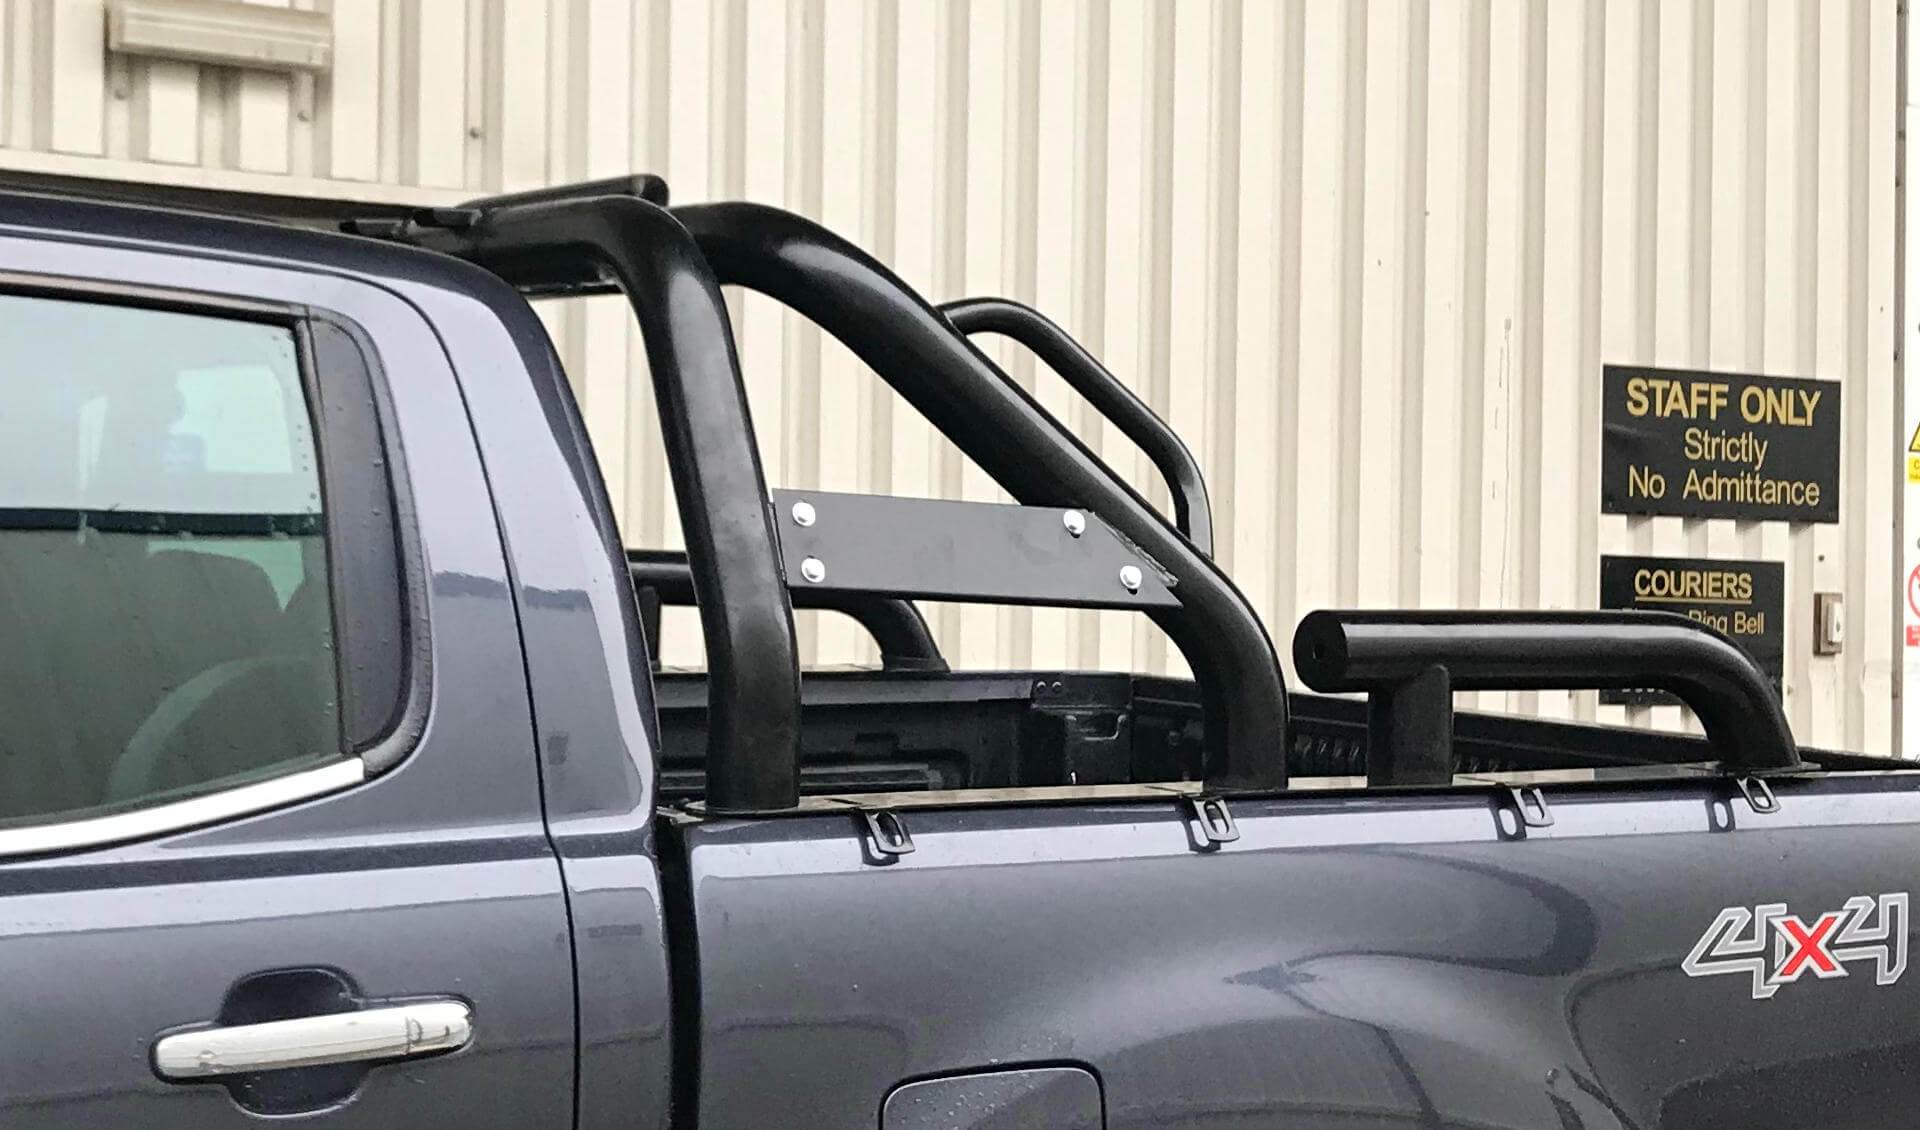 Black SUS201 Long Arm Roll Sports Bar with Grab Handle for the Ford Ranger 2012+ -  - sold by Direct4x4